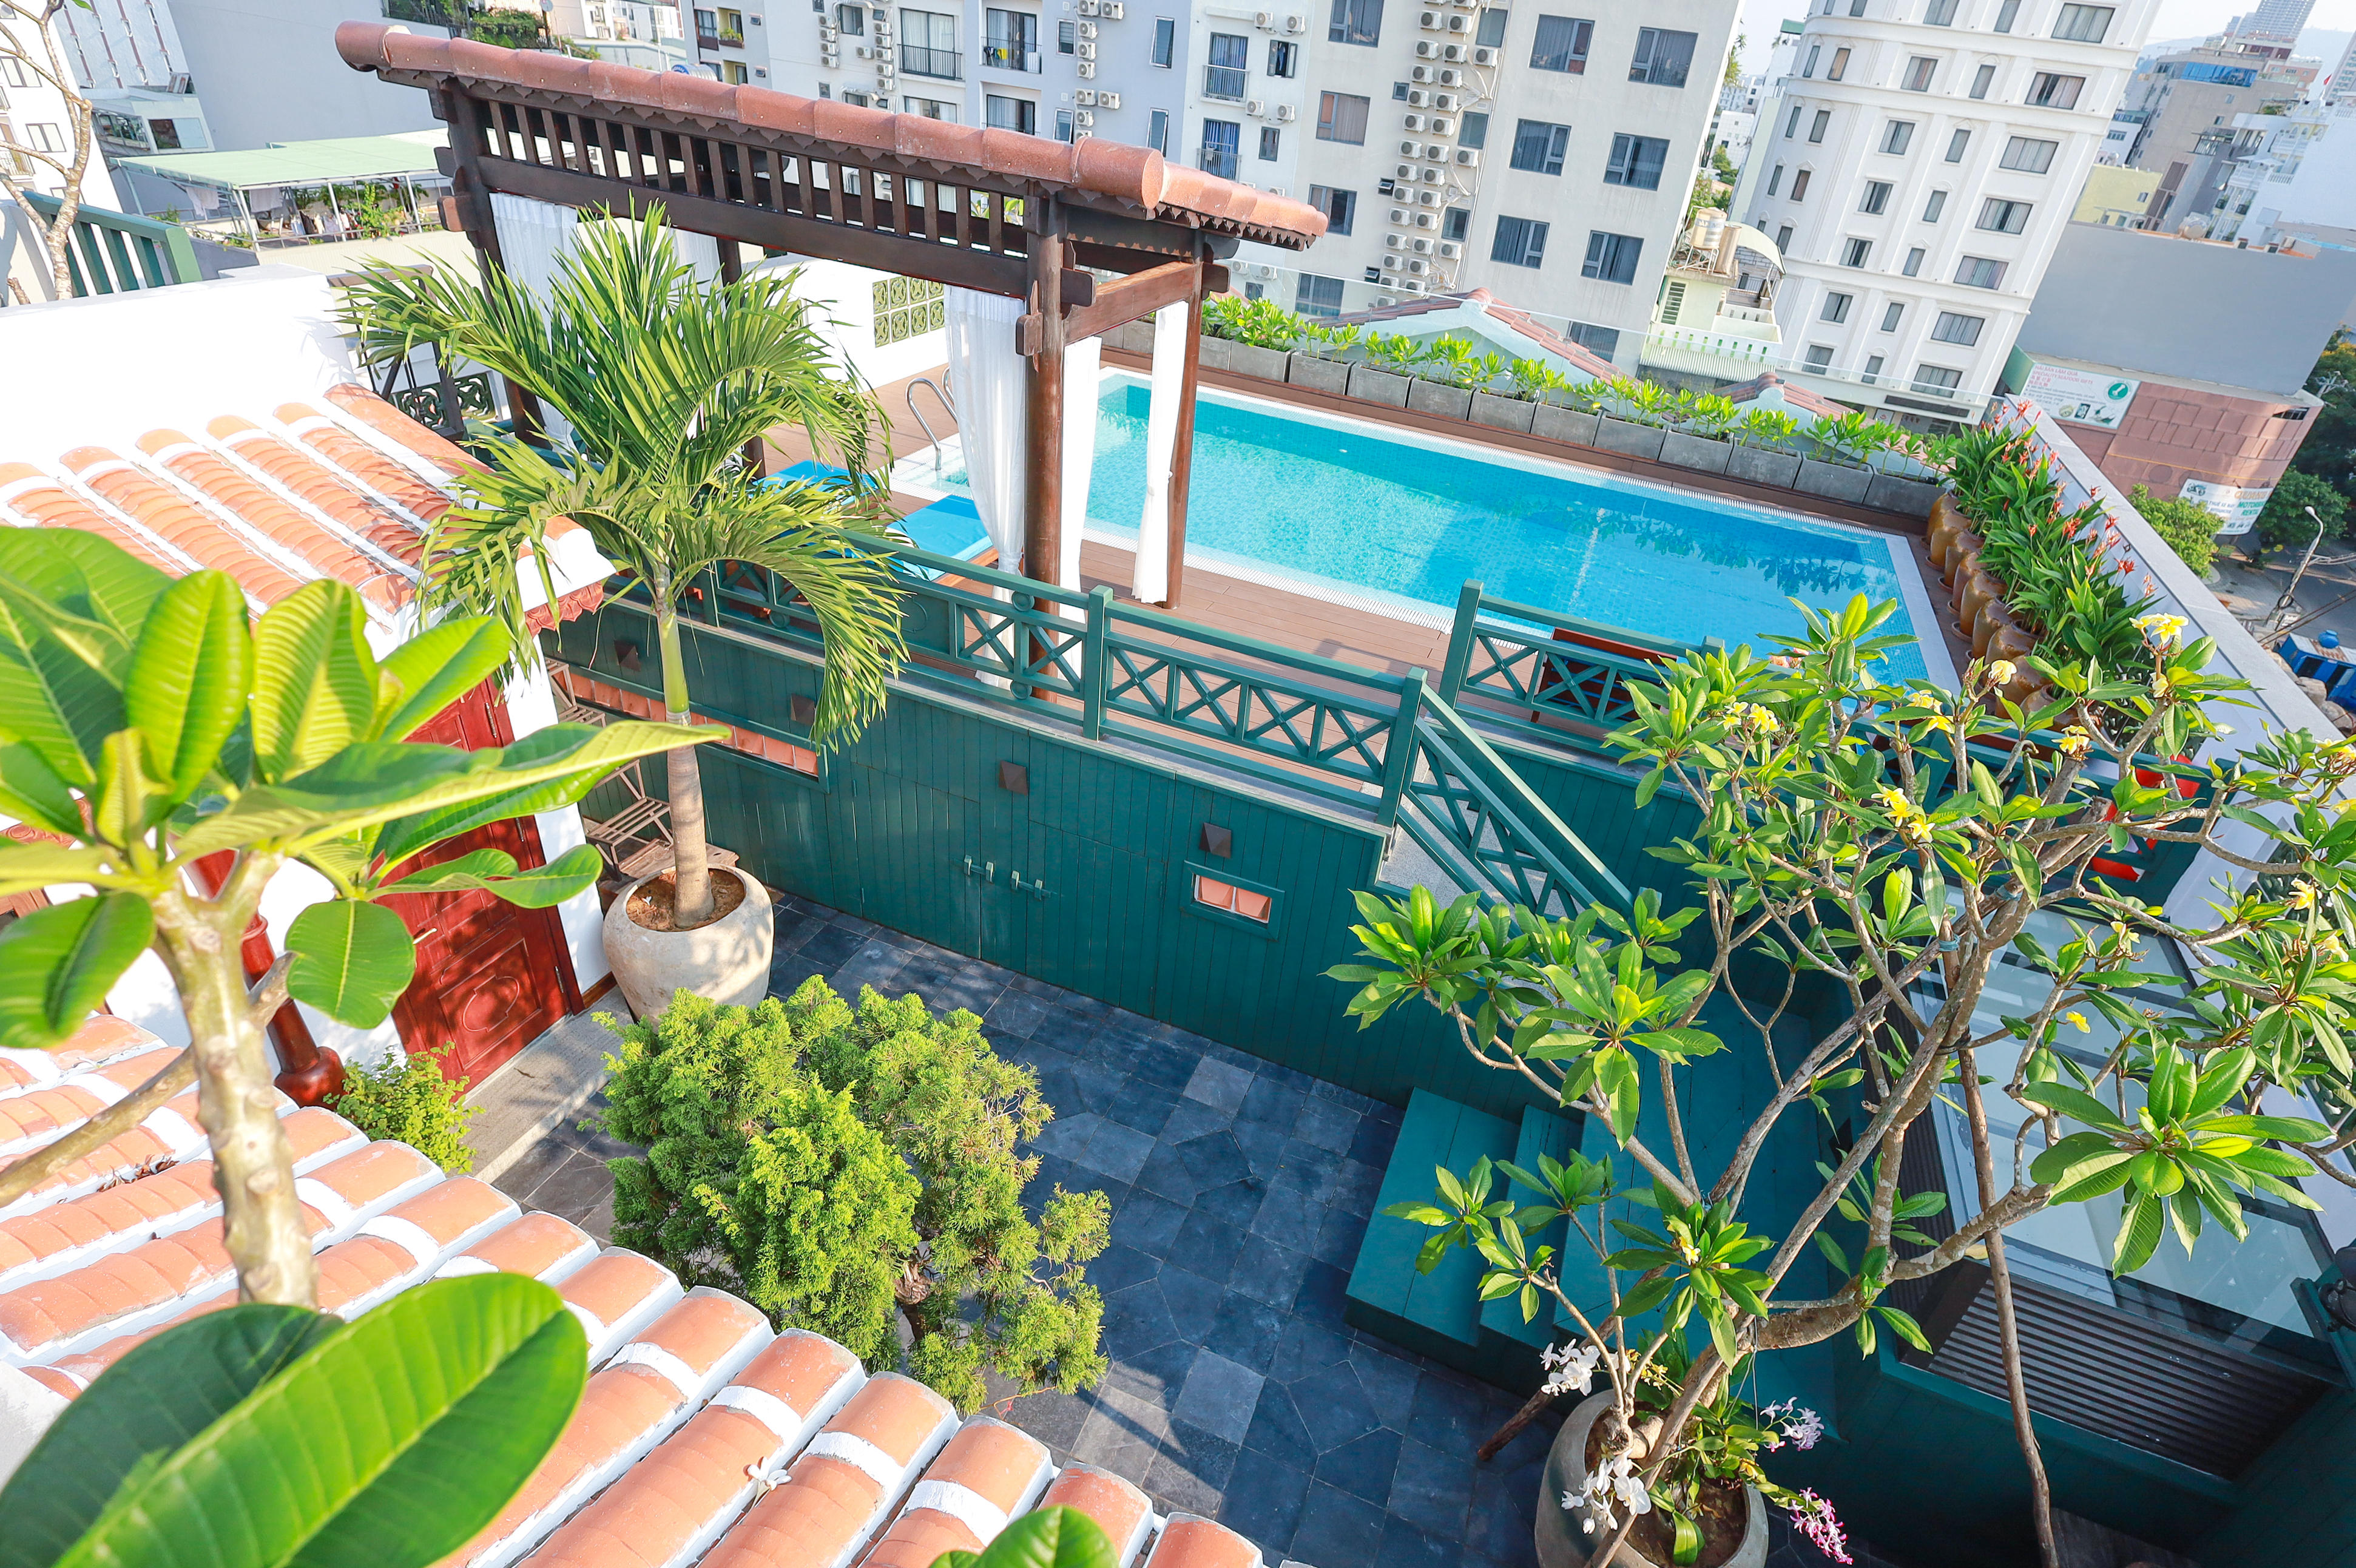 2 bedroom An Thuong, near the sea, 90 m2, rooftop swimming pool.